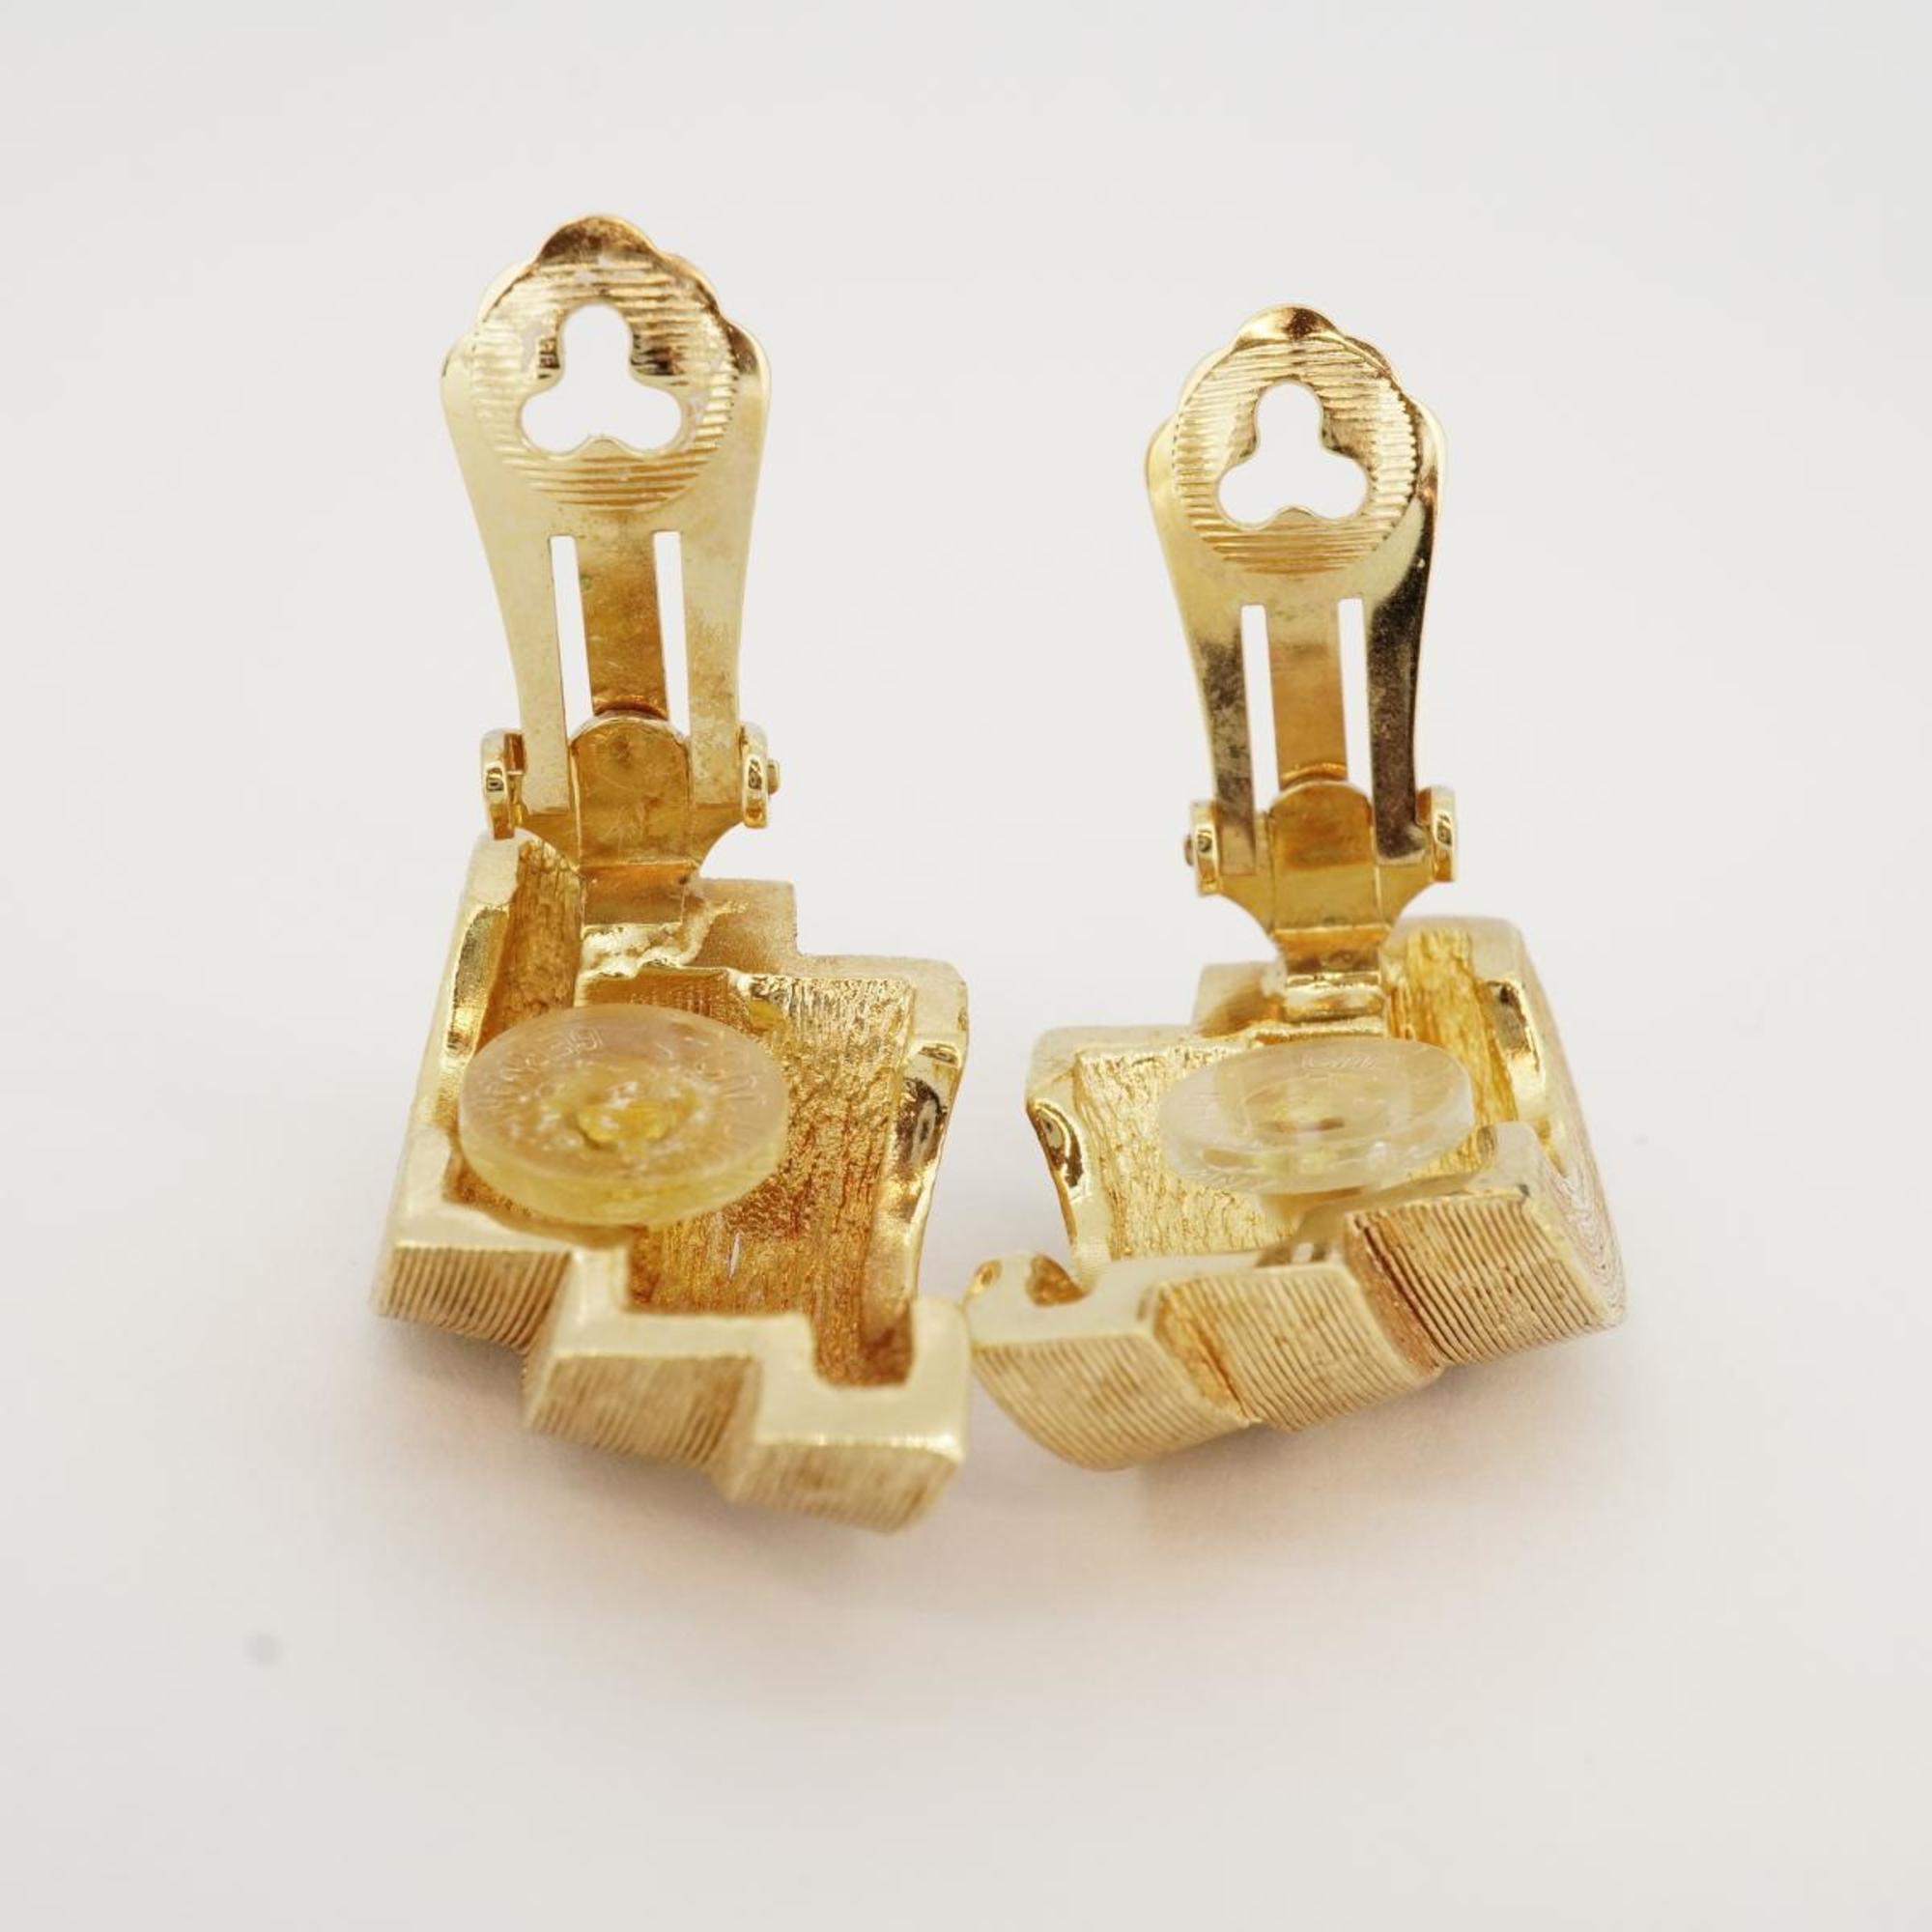 Christian Dior Earrings GP Plated Gold Women's